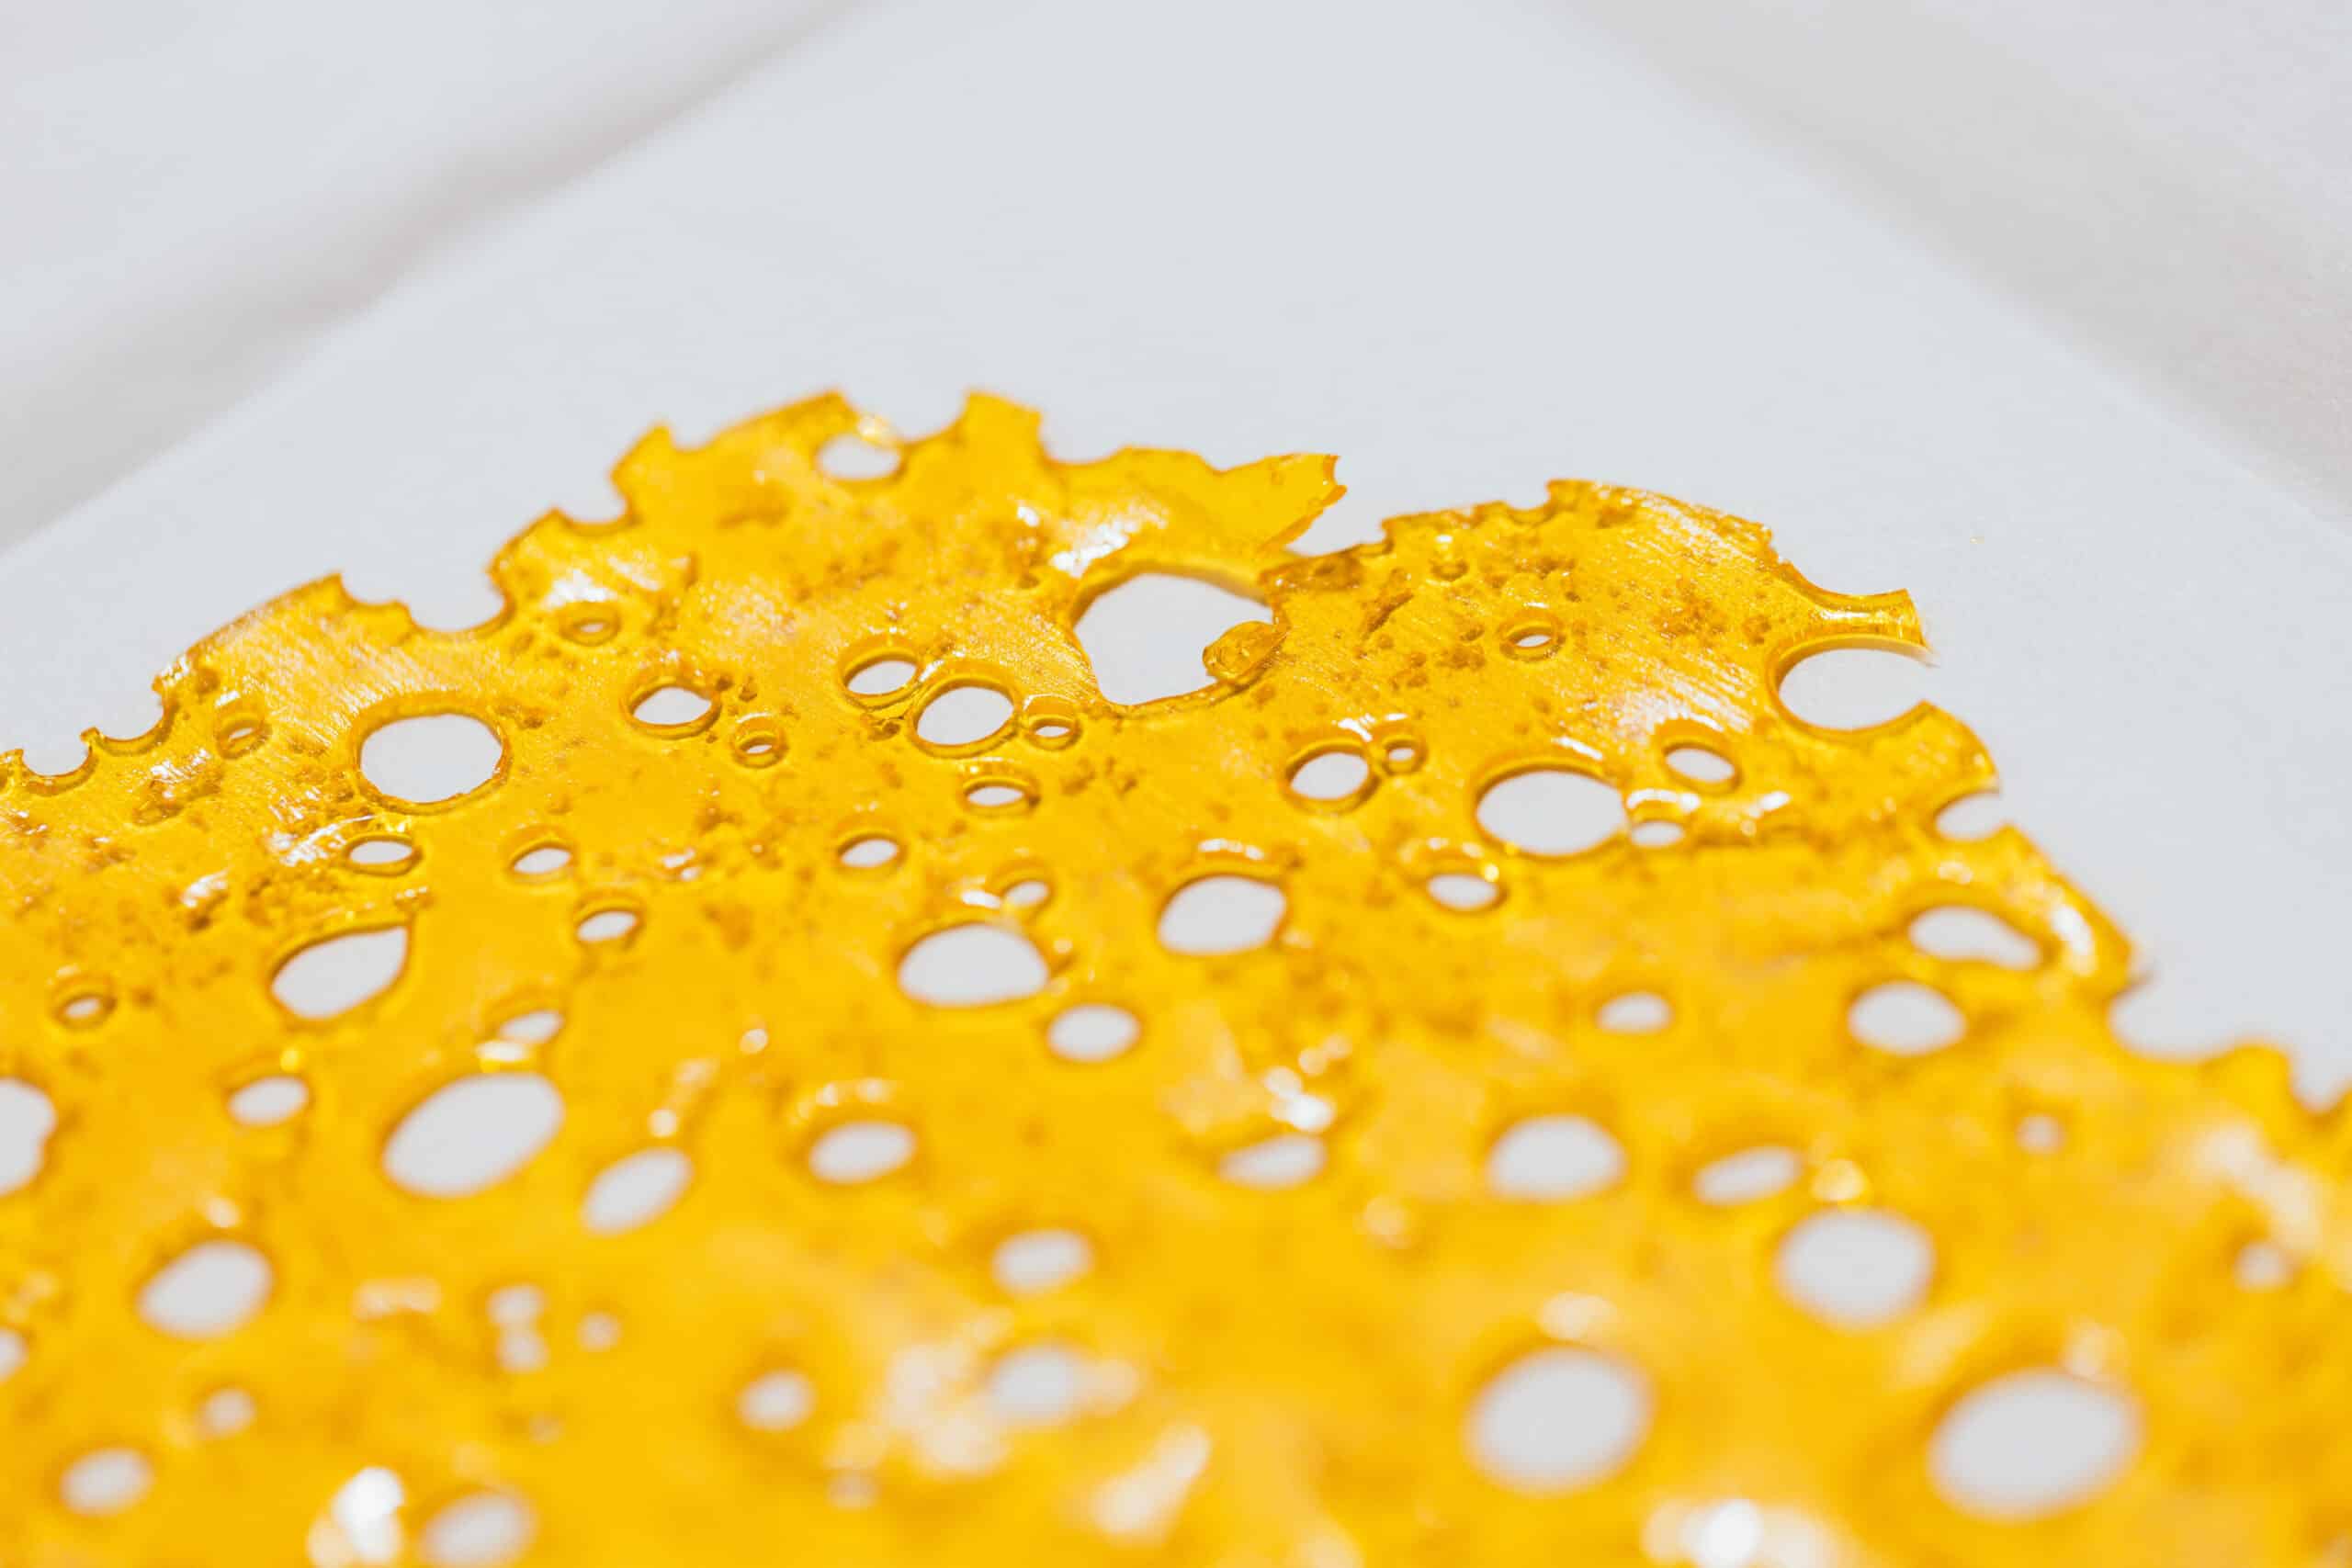 Cannabis,Shatter,Marijuana,Extract,Live,Resin,Concentrate,Thc,Weed,Oil